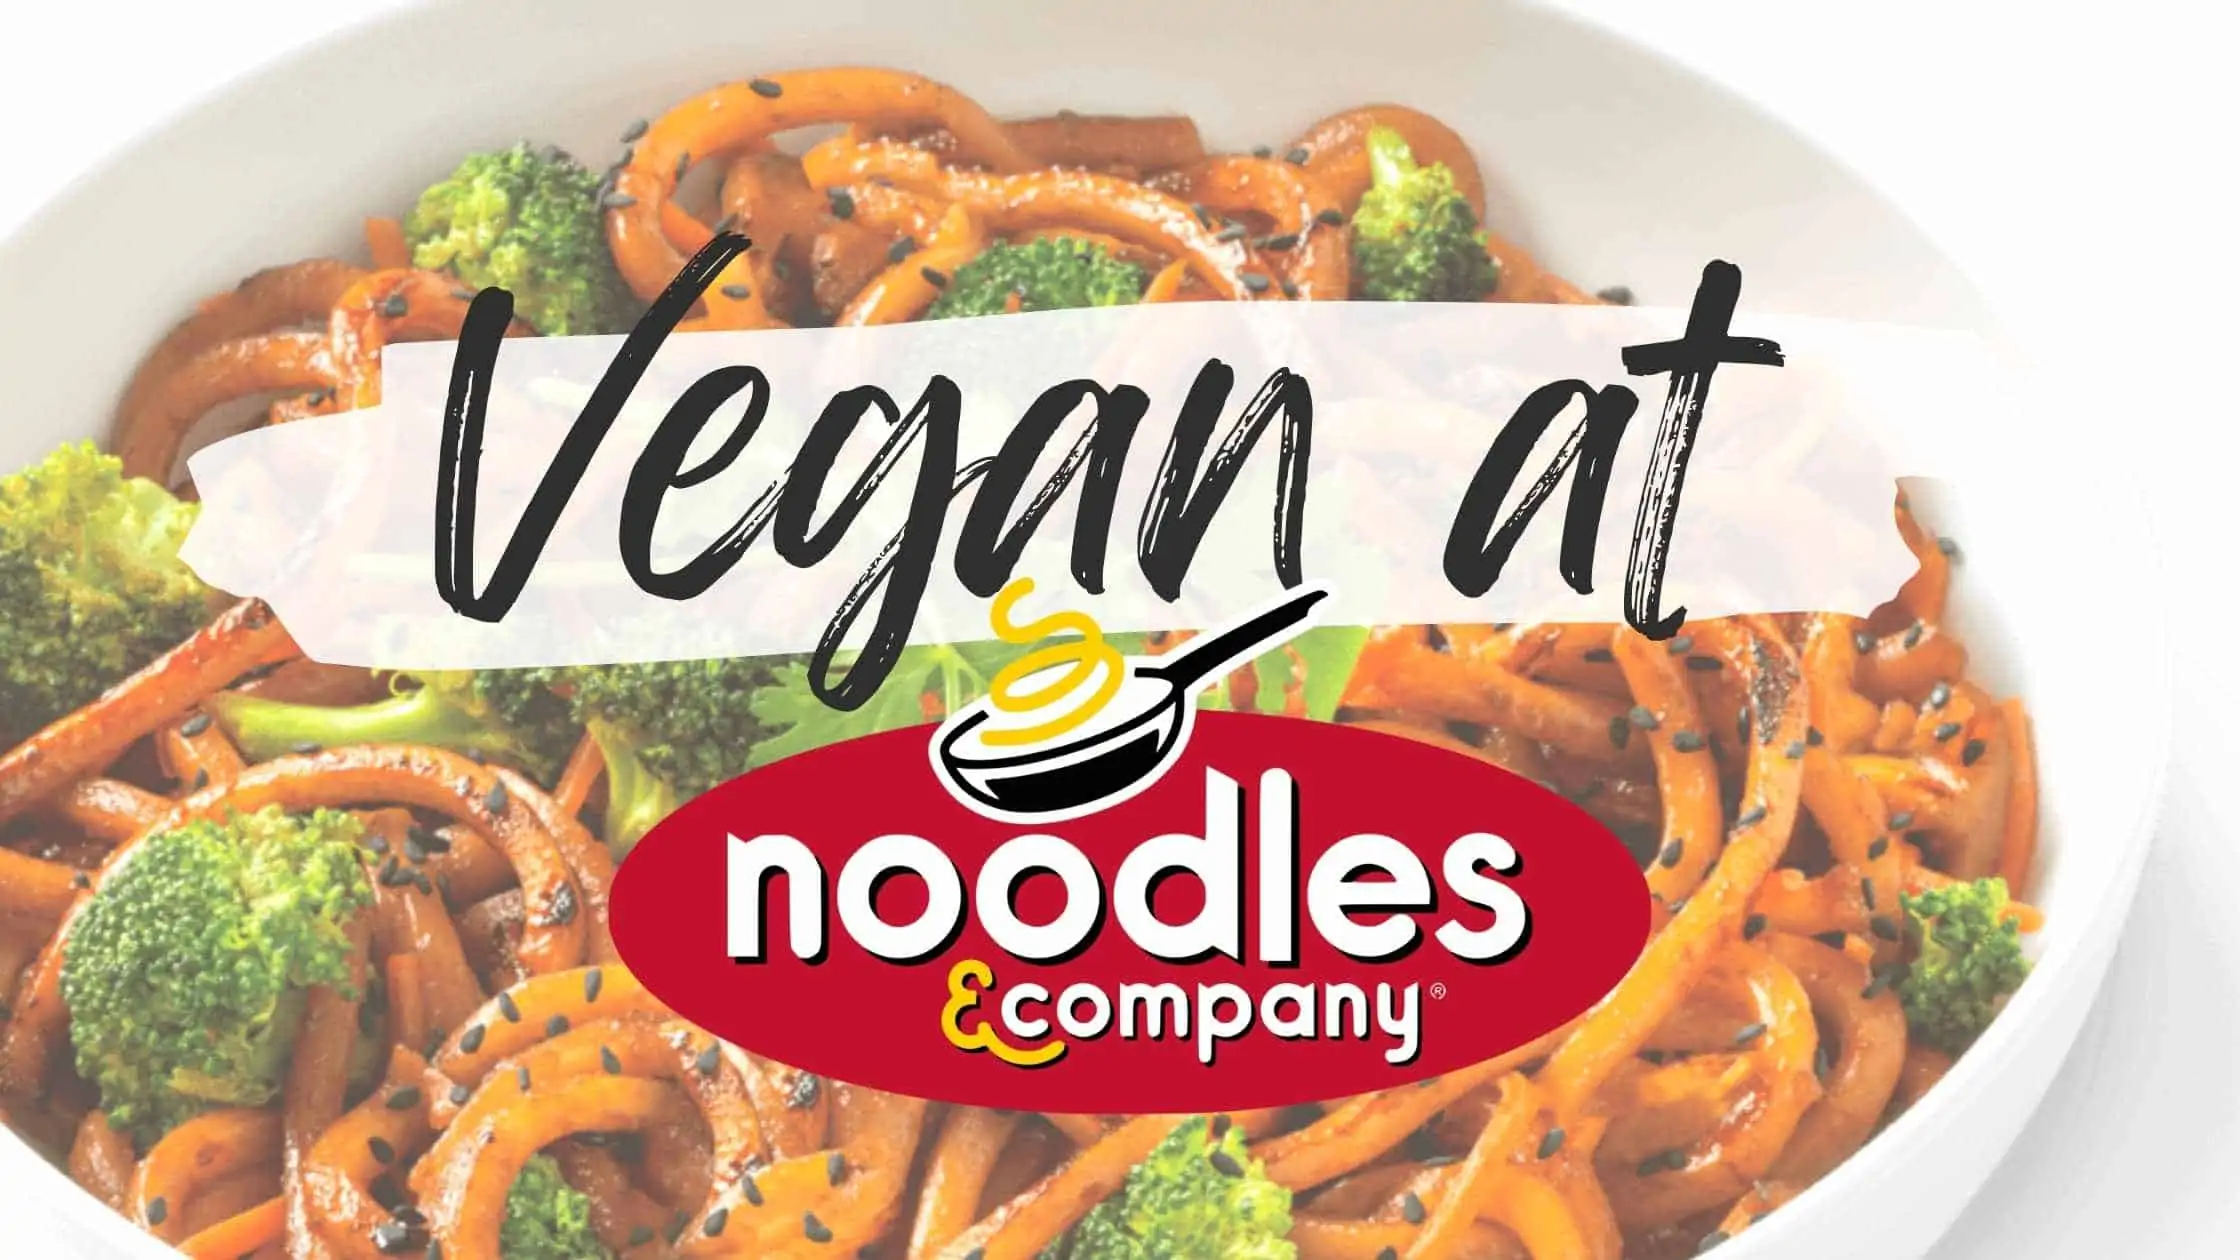 How to Order Vegan at Noodles & Company